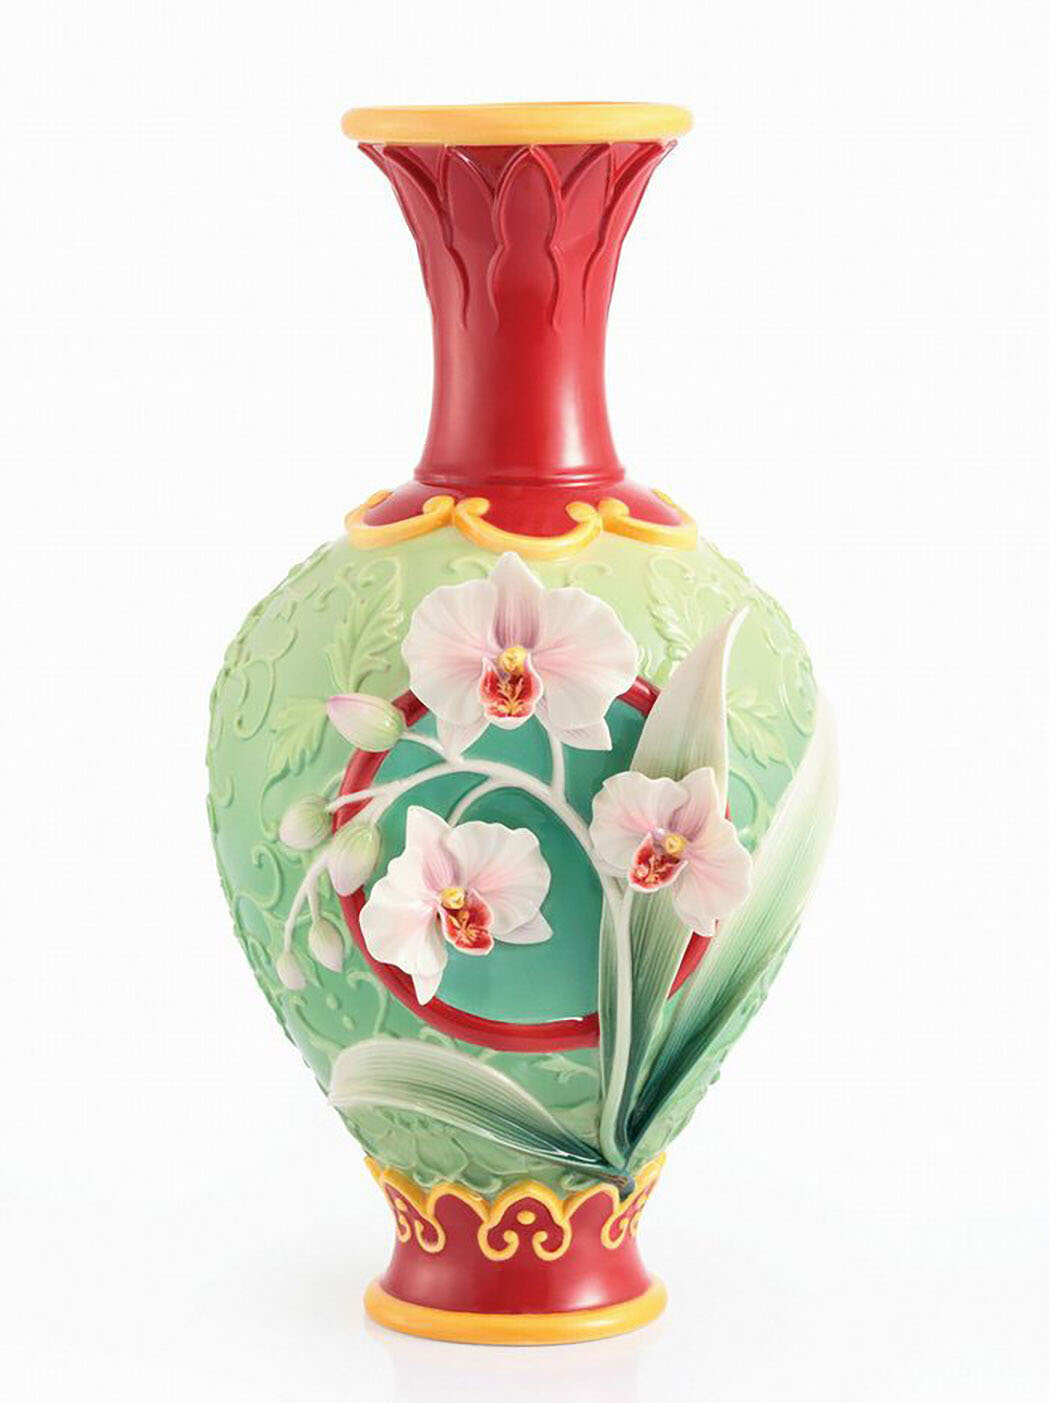 Franz Porcelain Continuity Of Fortune The Moth Orchid Vase FZ02957